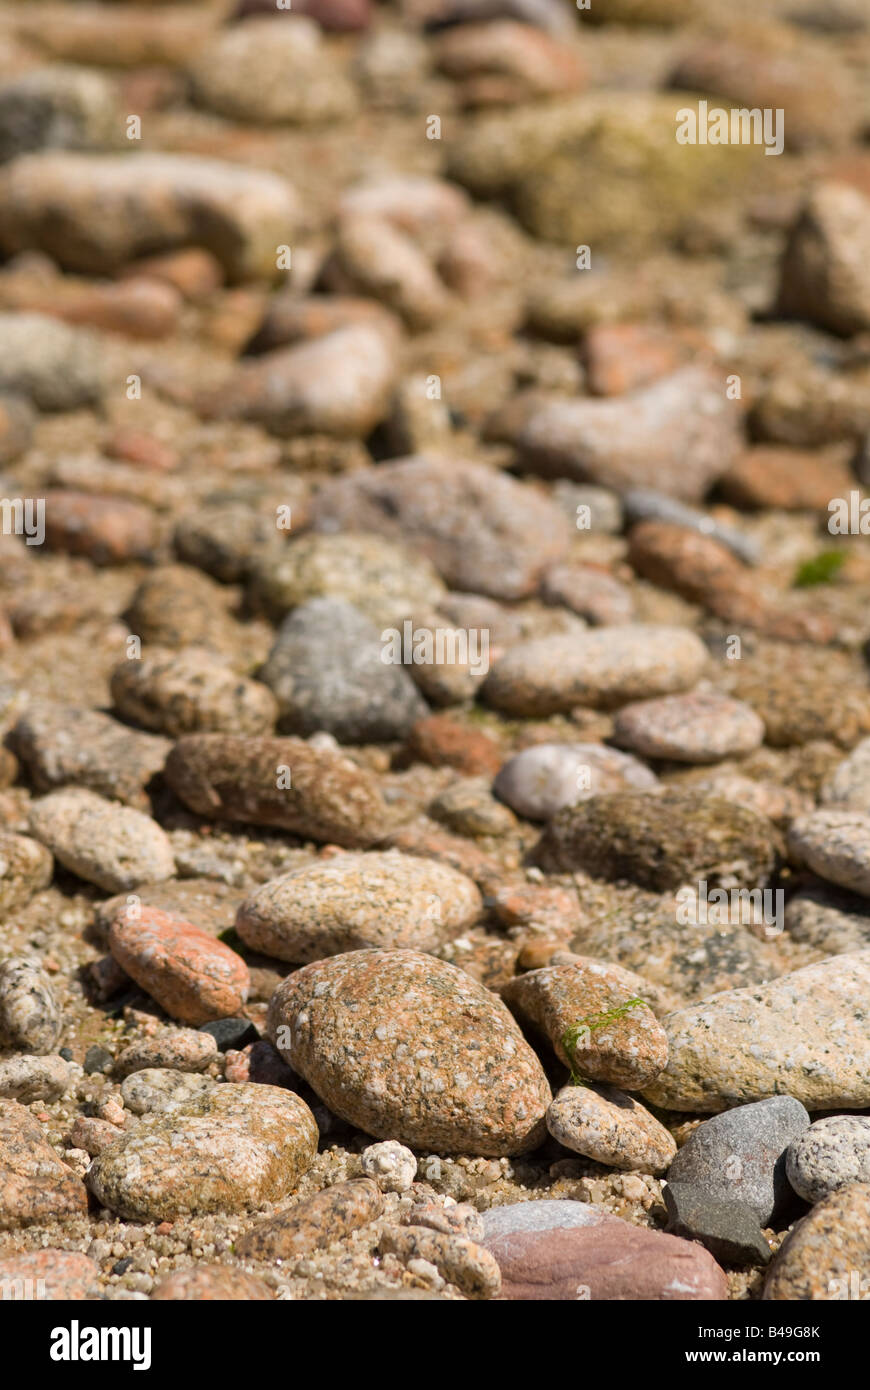 Stones on a beach, gently blurring into the background Stock Photo